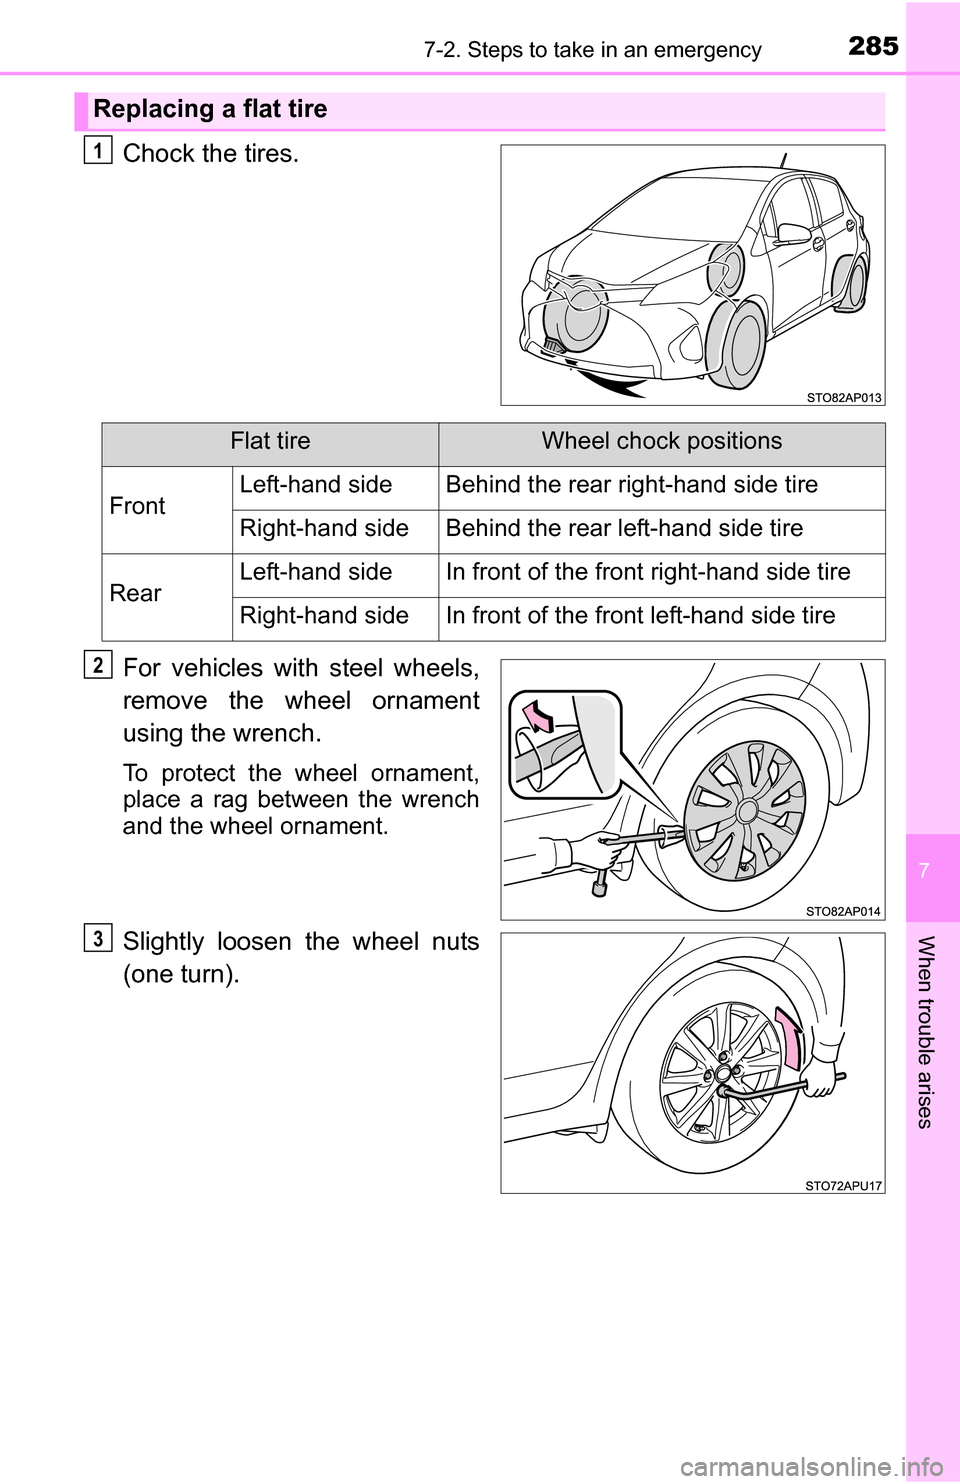 TOYOTA YARIS 2016 3.G Owners Manual 2857-2. Steps to take in an emergency
7
When trouble arises
Chock the tires.
For vehicles with steel wheels,
remove the wheel ornament
using the wrench.
To protect the wheel ornament,
place a rag betw